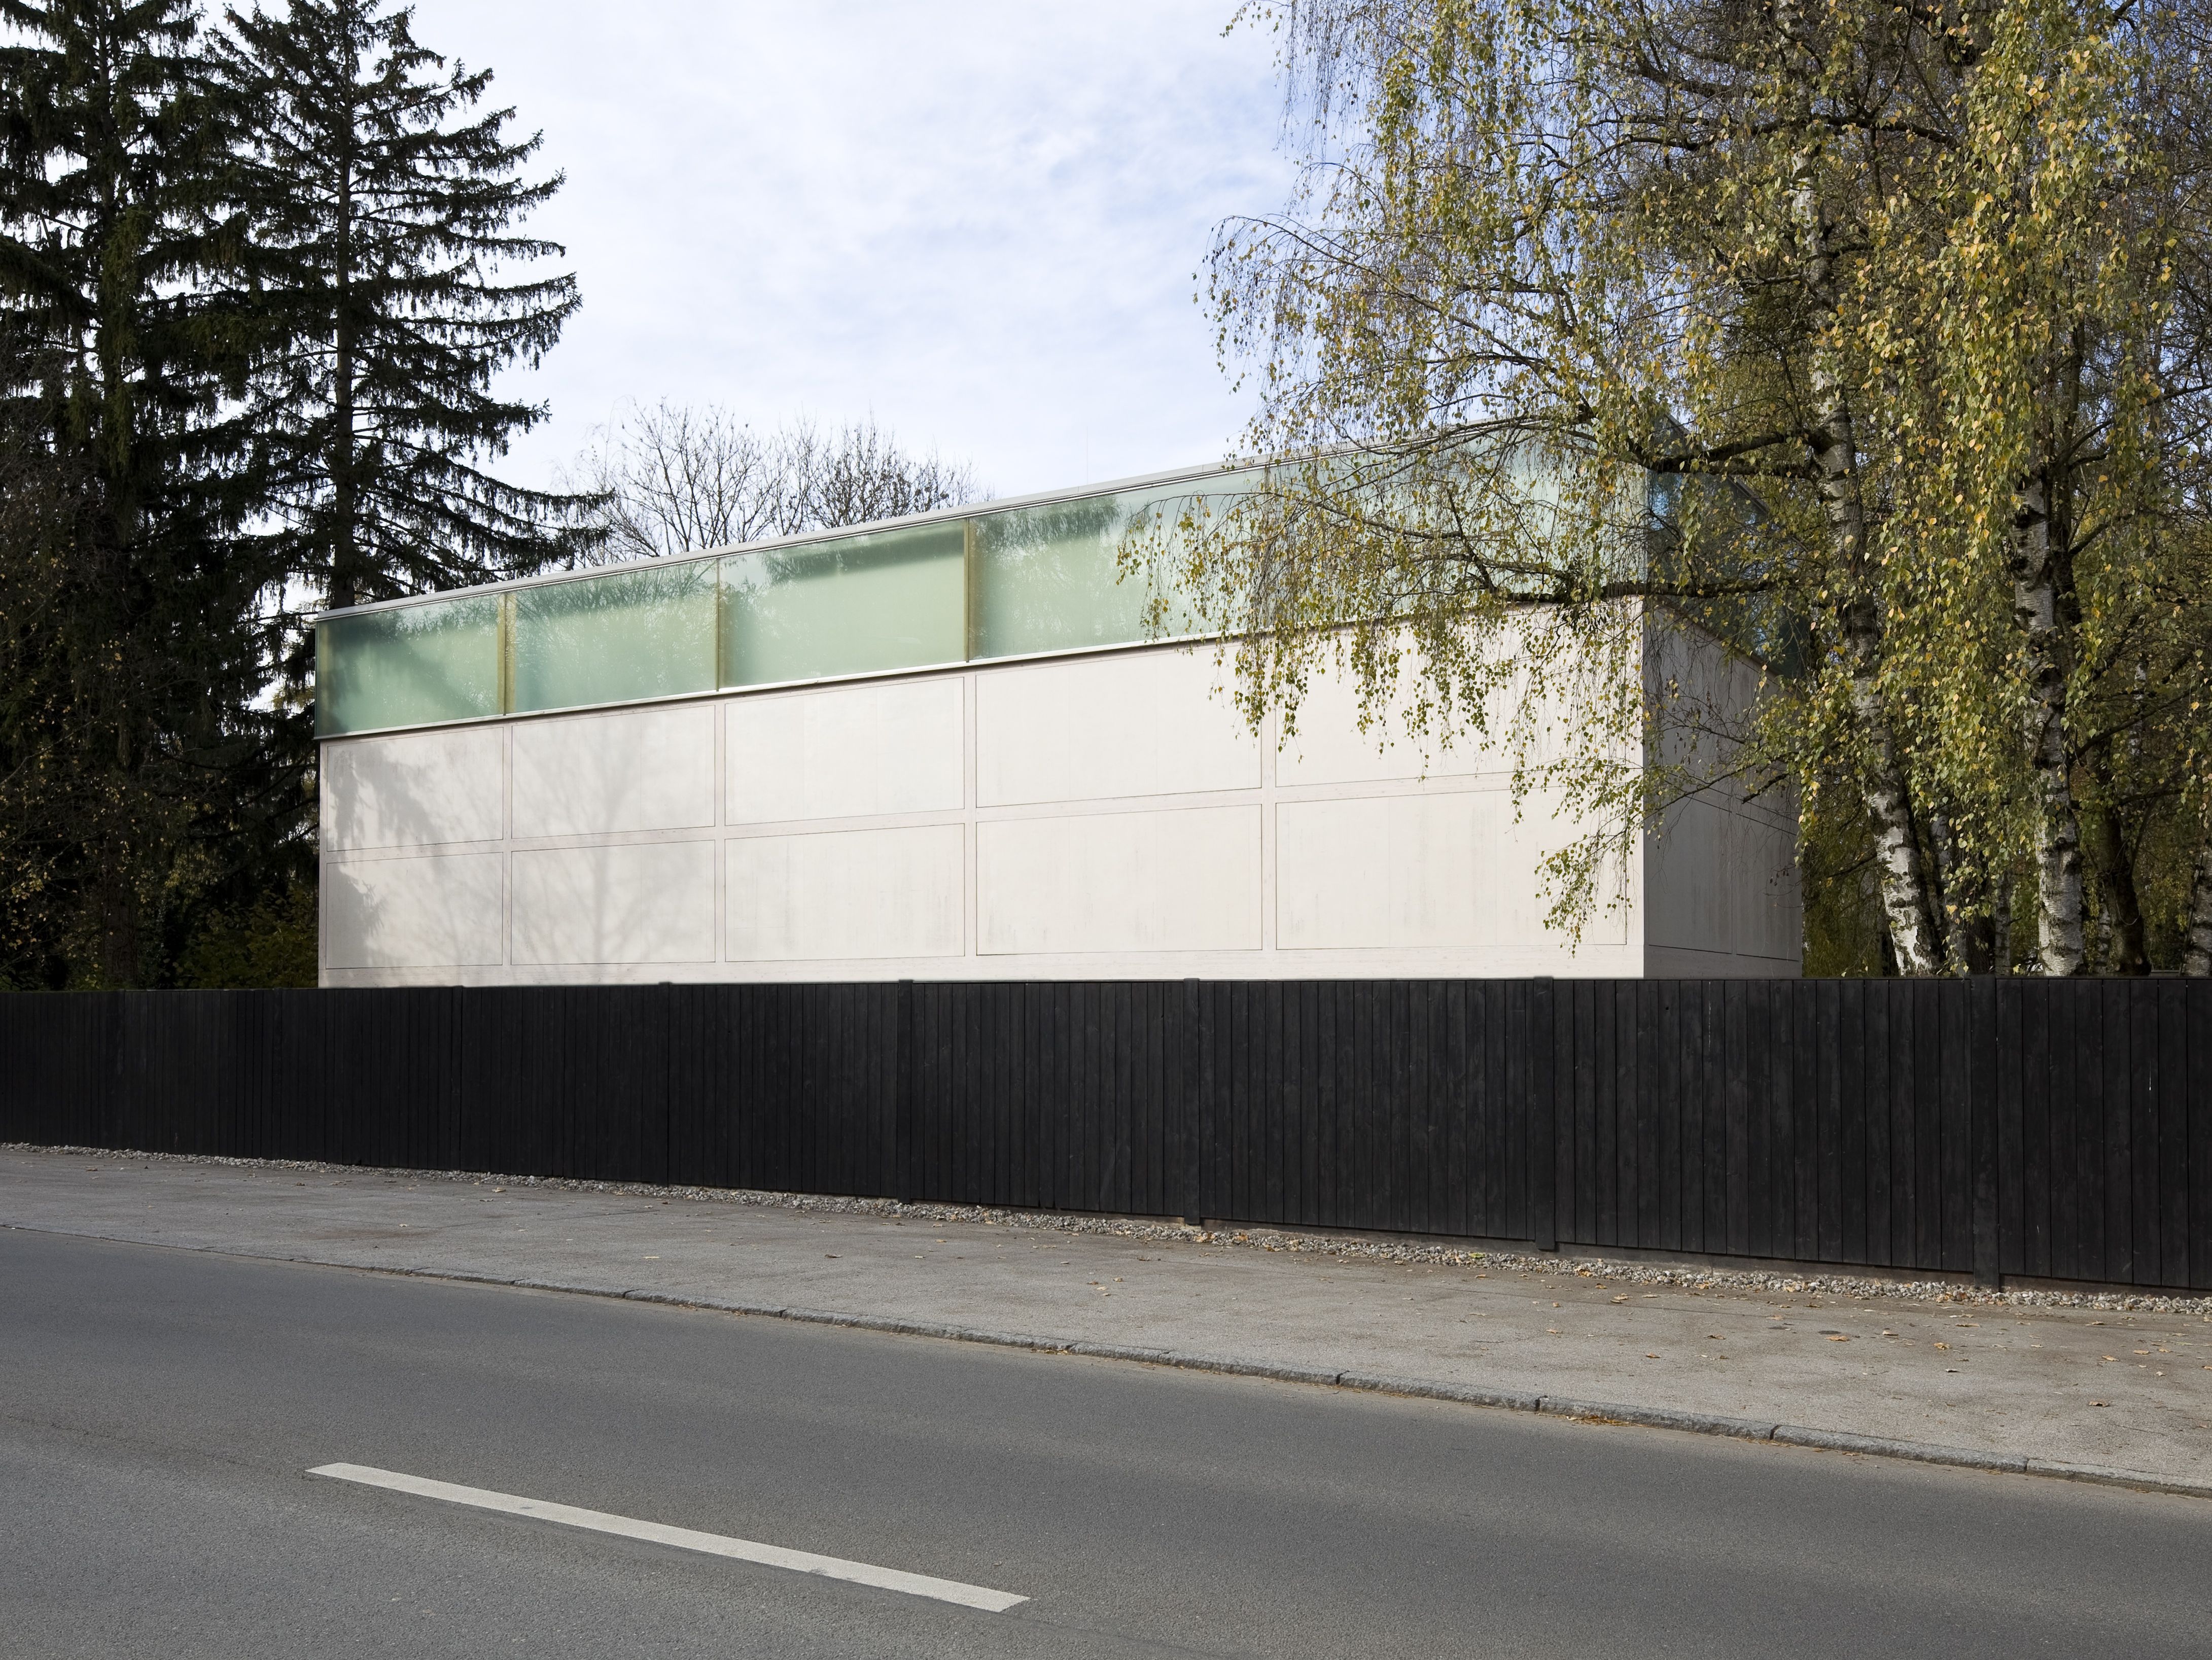 The exhibition building of the Sammlung Goetz from the street